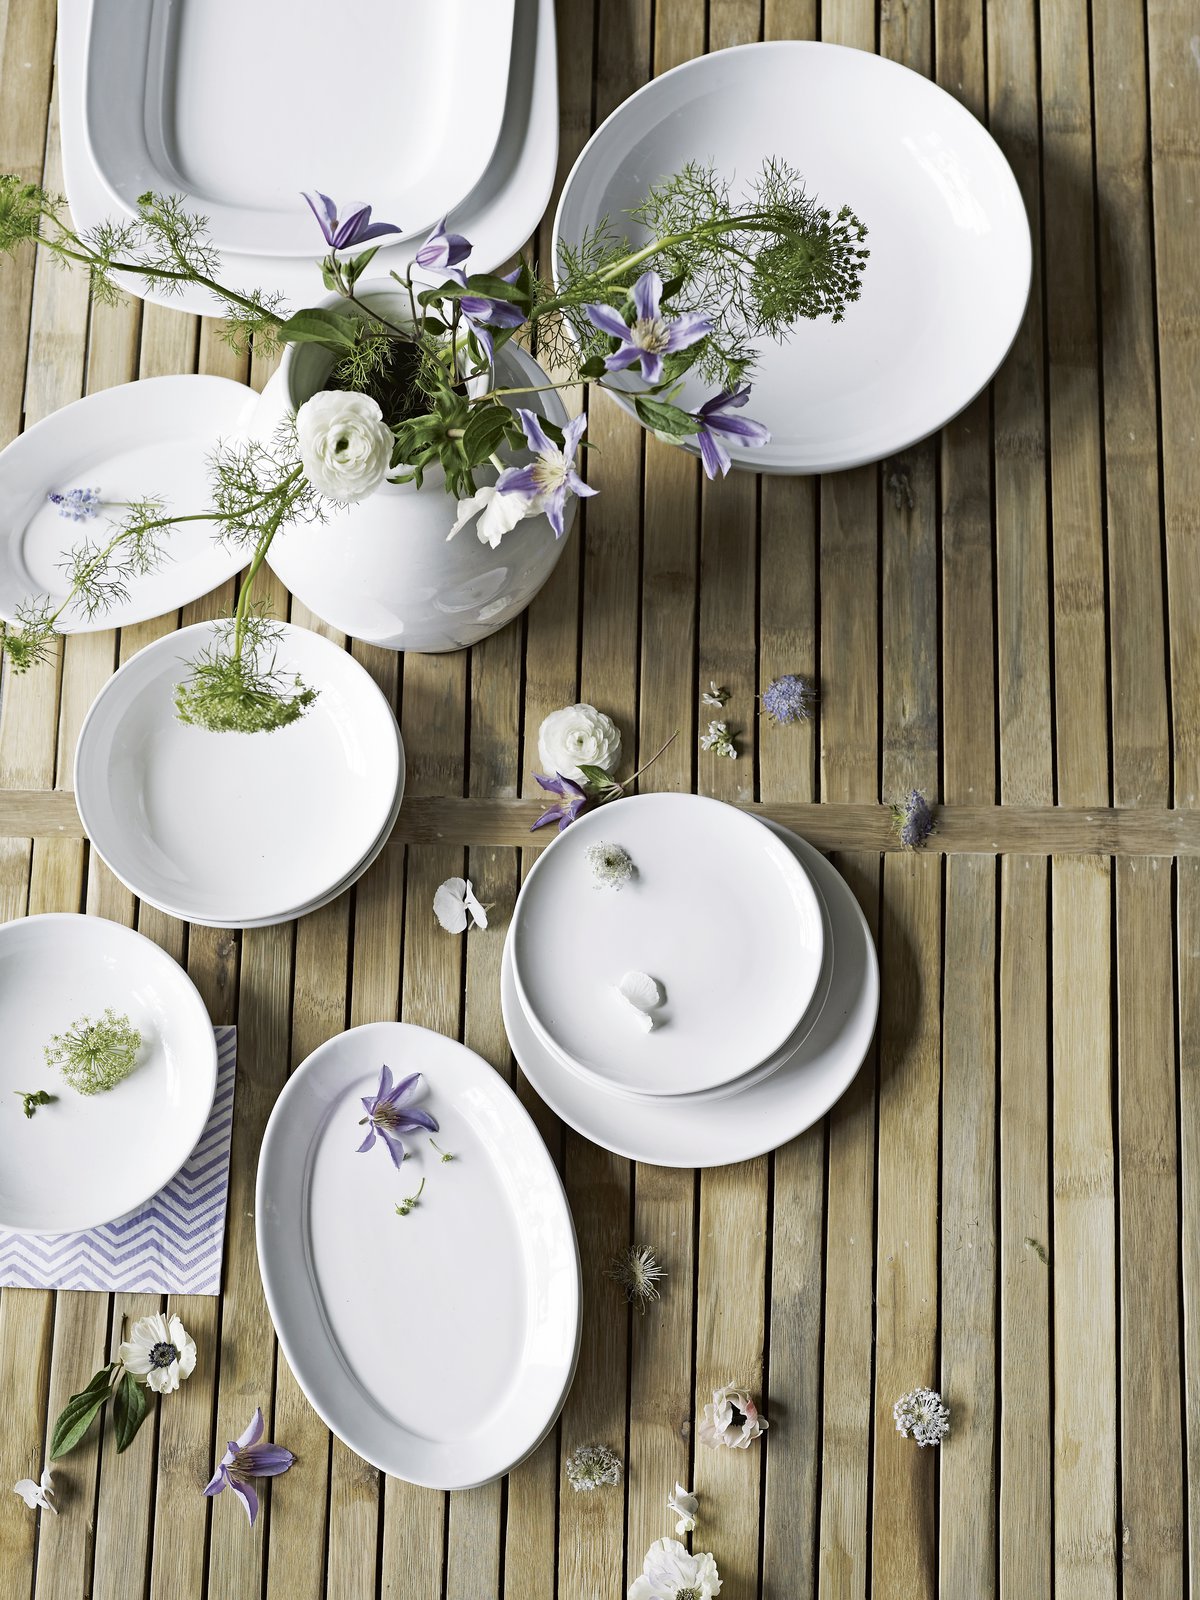 Easter table setting with fresh flowers and white ceramic - bring Spring to your Easter table